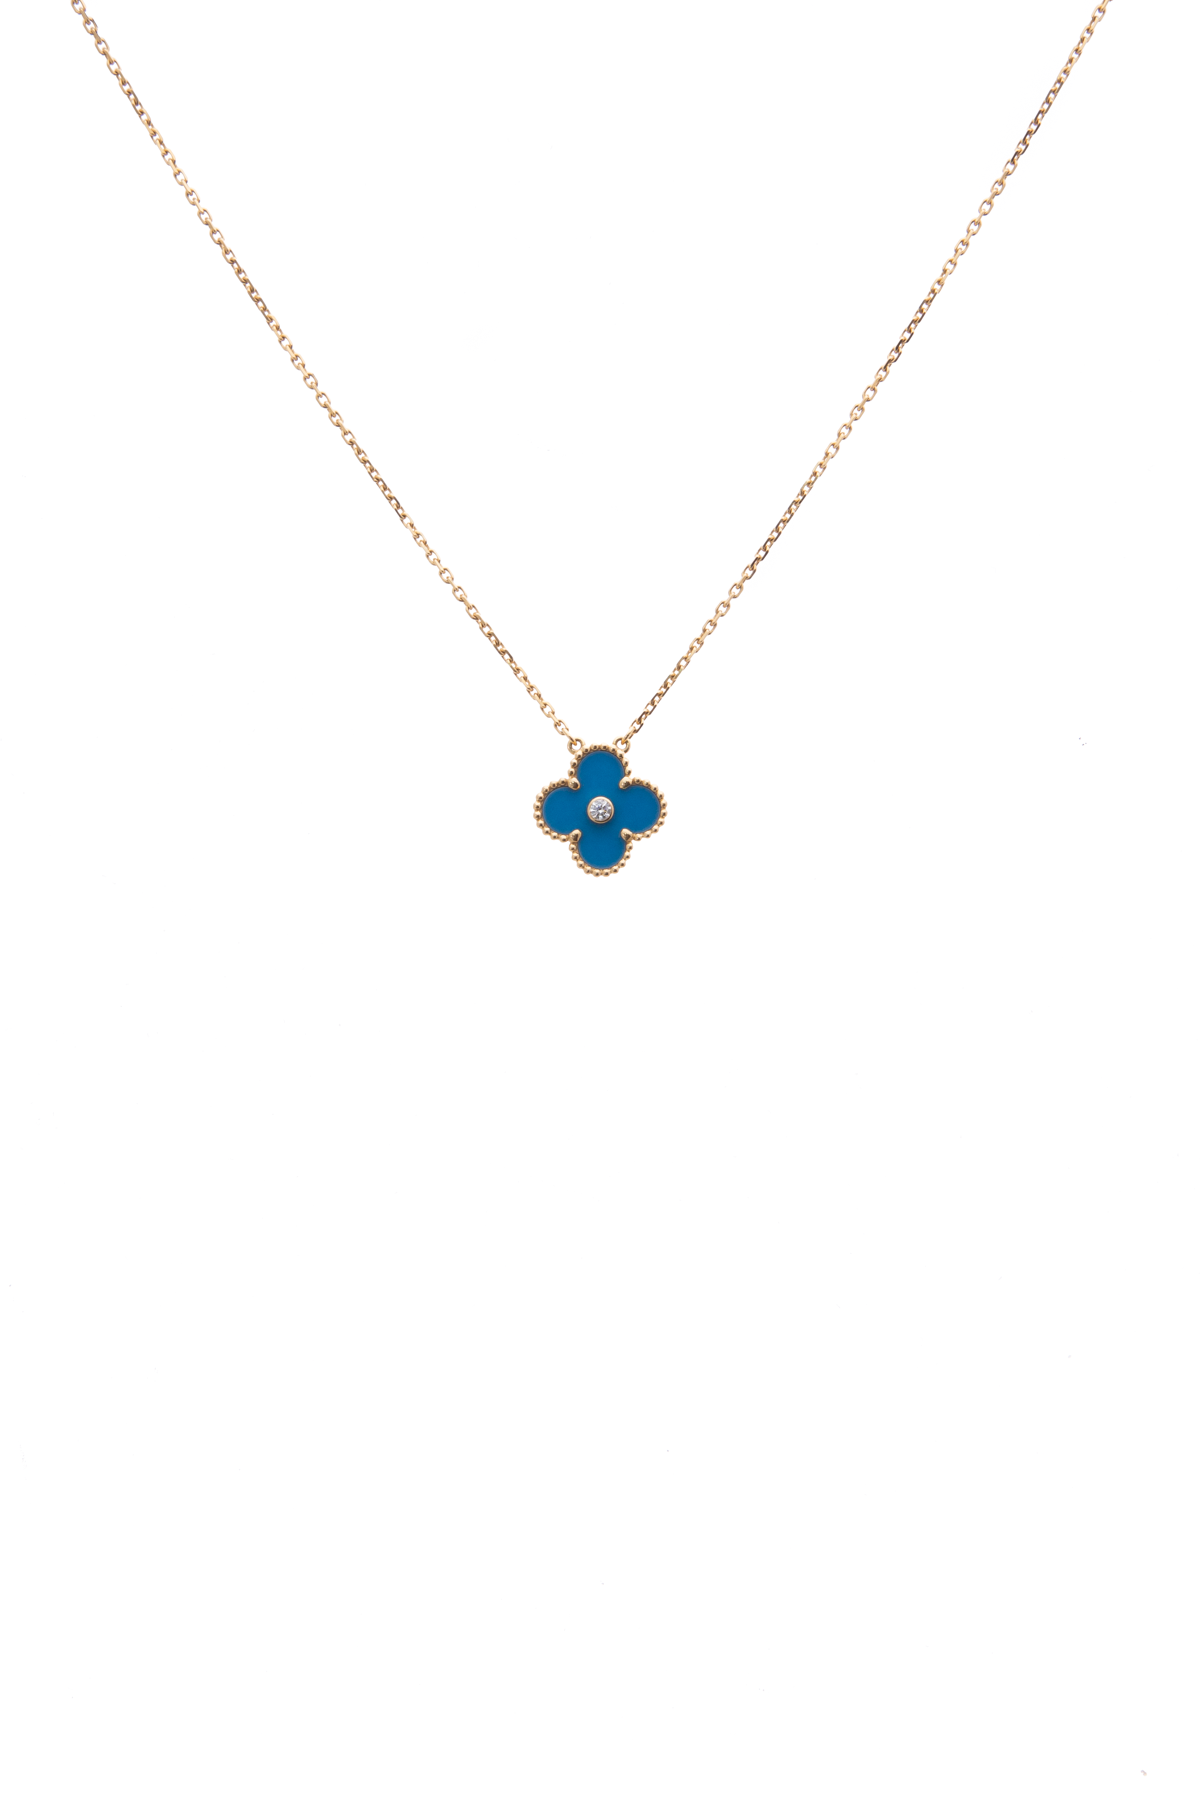 New Arrival Van Cleef Arpels Vintage Alhambra Necklace 18K White Gold Blue  Stone : r/luxury_jewelry_